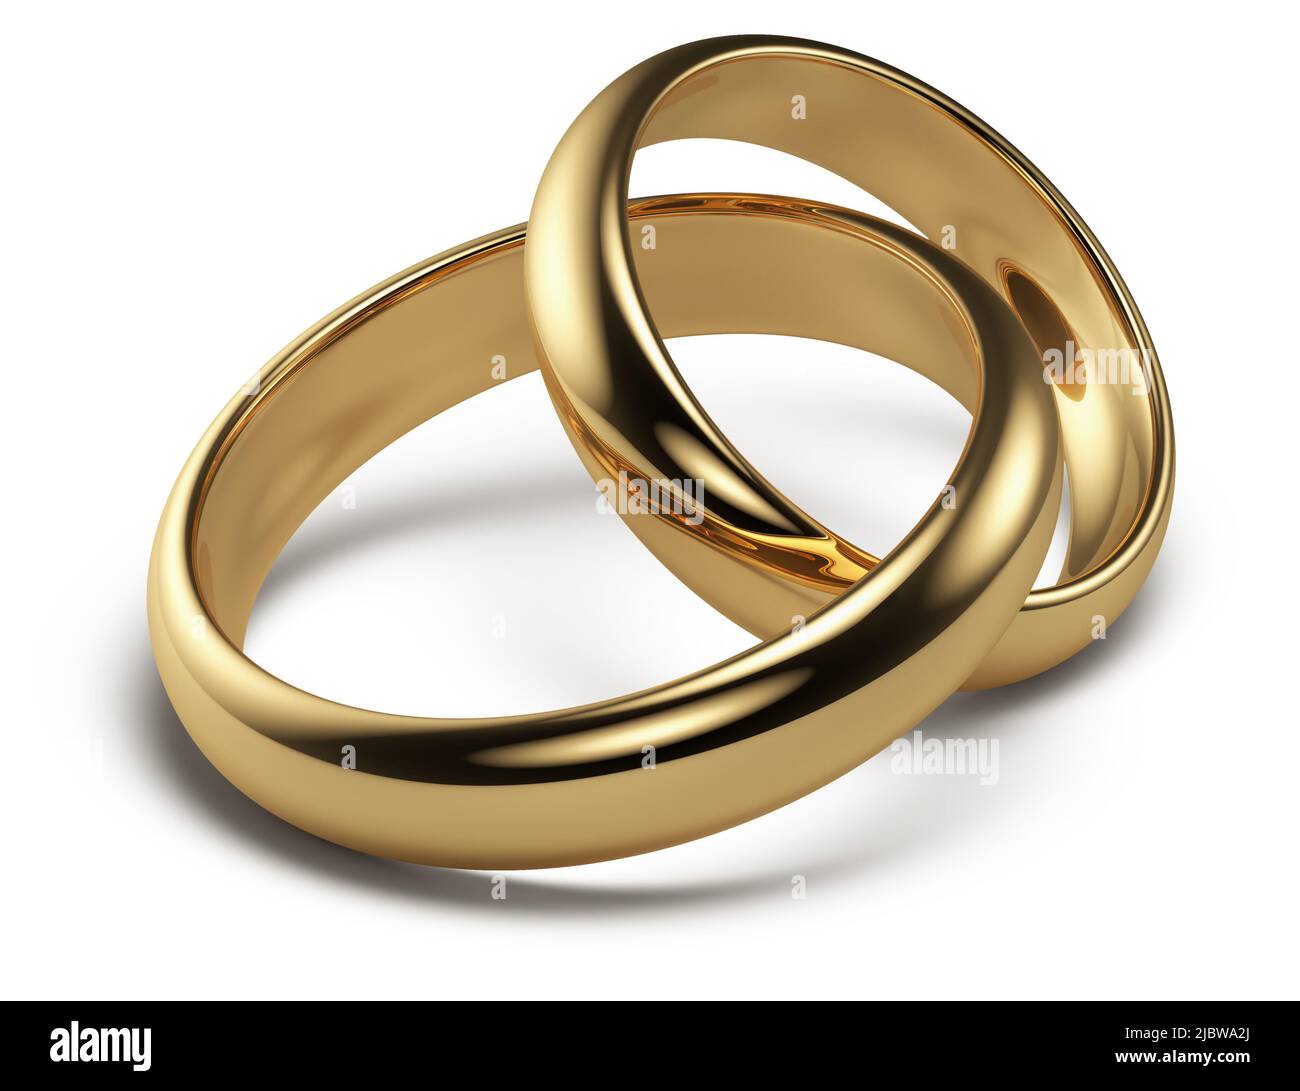 golden wedding ring isolated on a white background. 3d rendering. Stock Photo